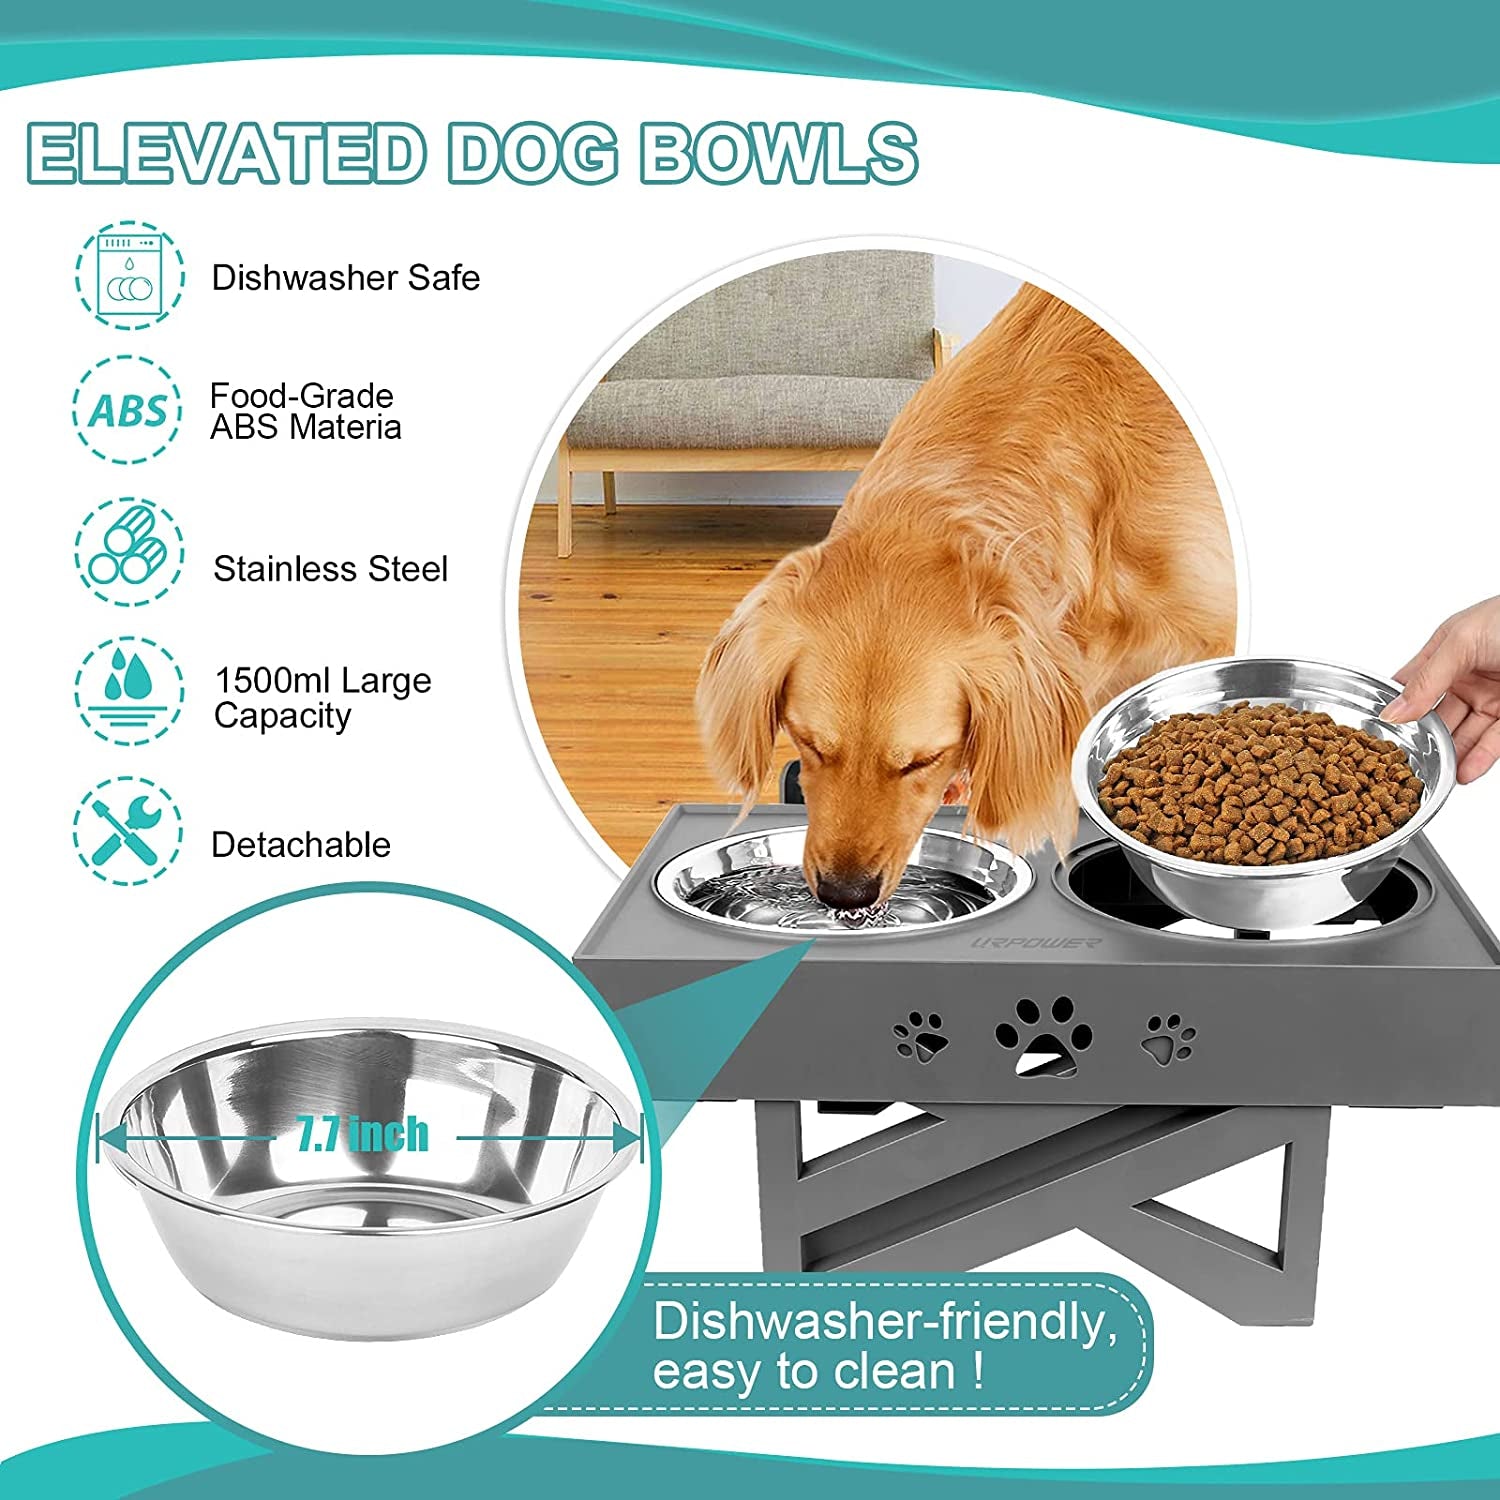 URPOWER Elevated Dog Bowls Adjustable Raised Dog Bowl with 2 Stainless Steel 1.5L Dog Food Bowls Stand Non-Slip No Spill Dog Dish Adjusts to 3 Heights 2.8”, 8”, 12”For Small Medium Large Dogs and Cats